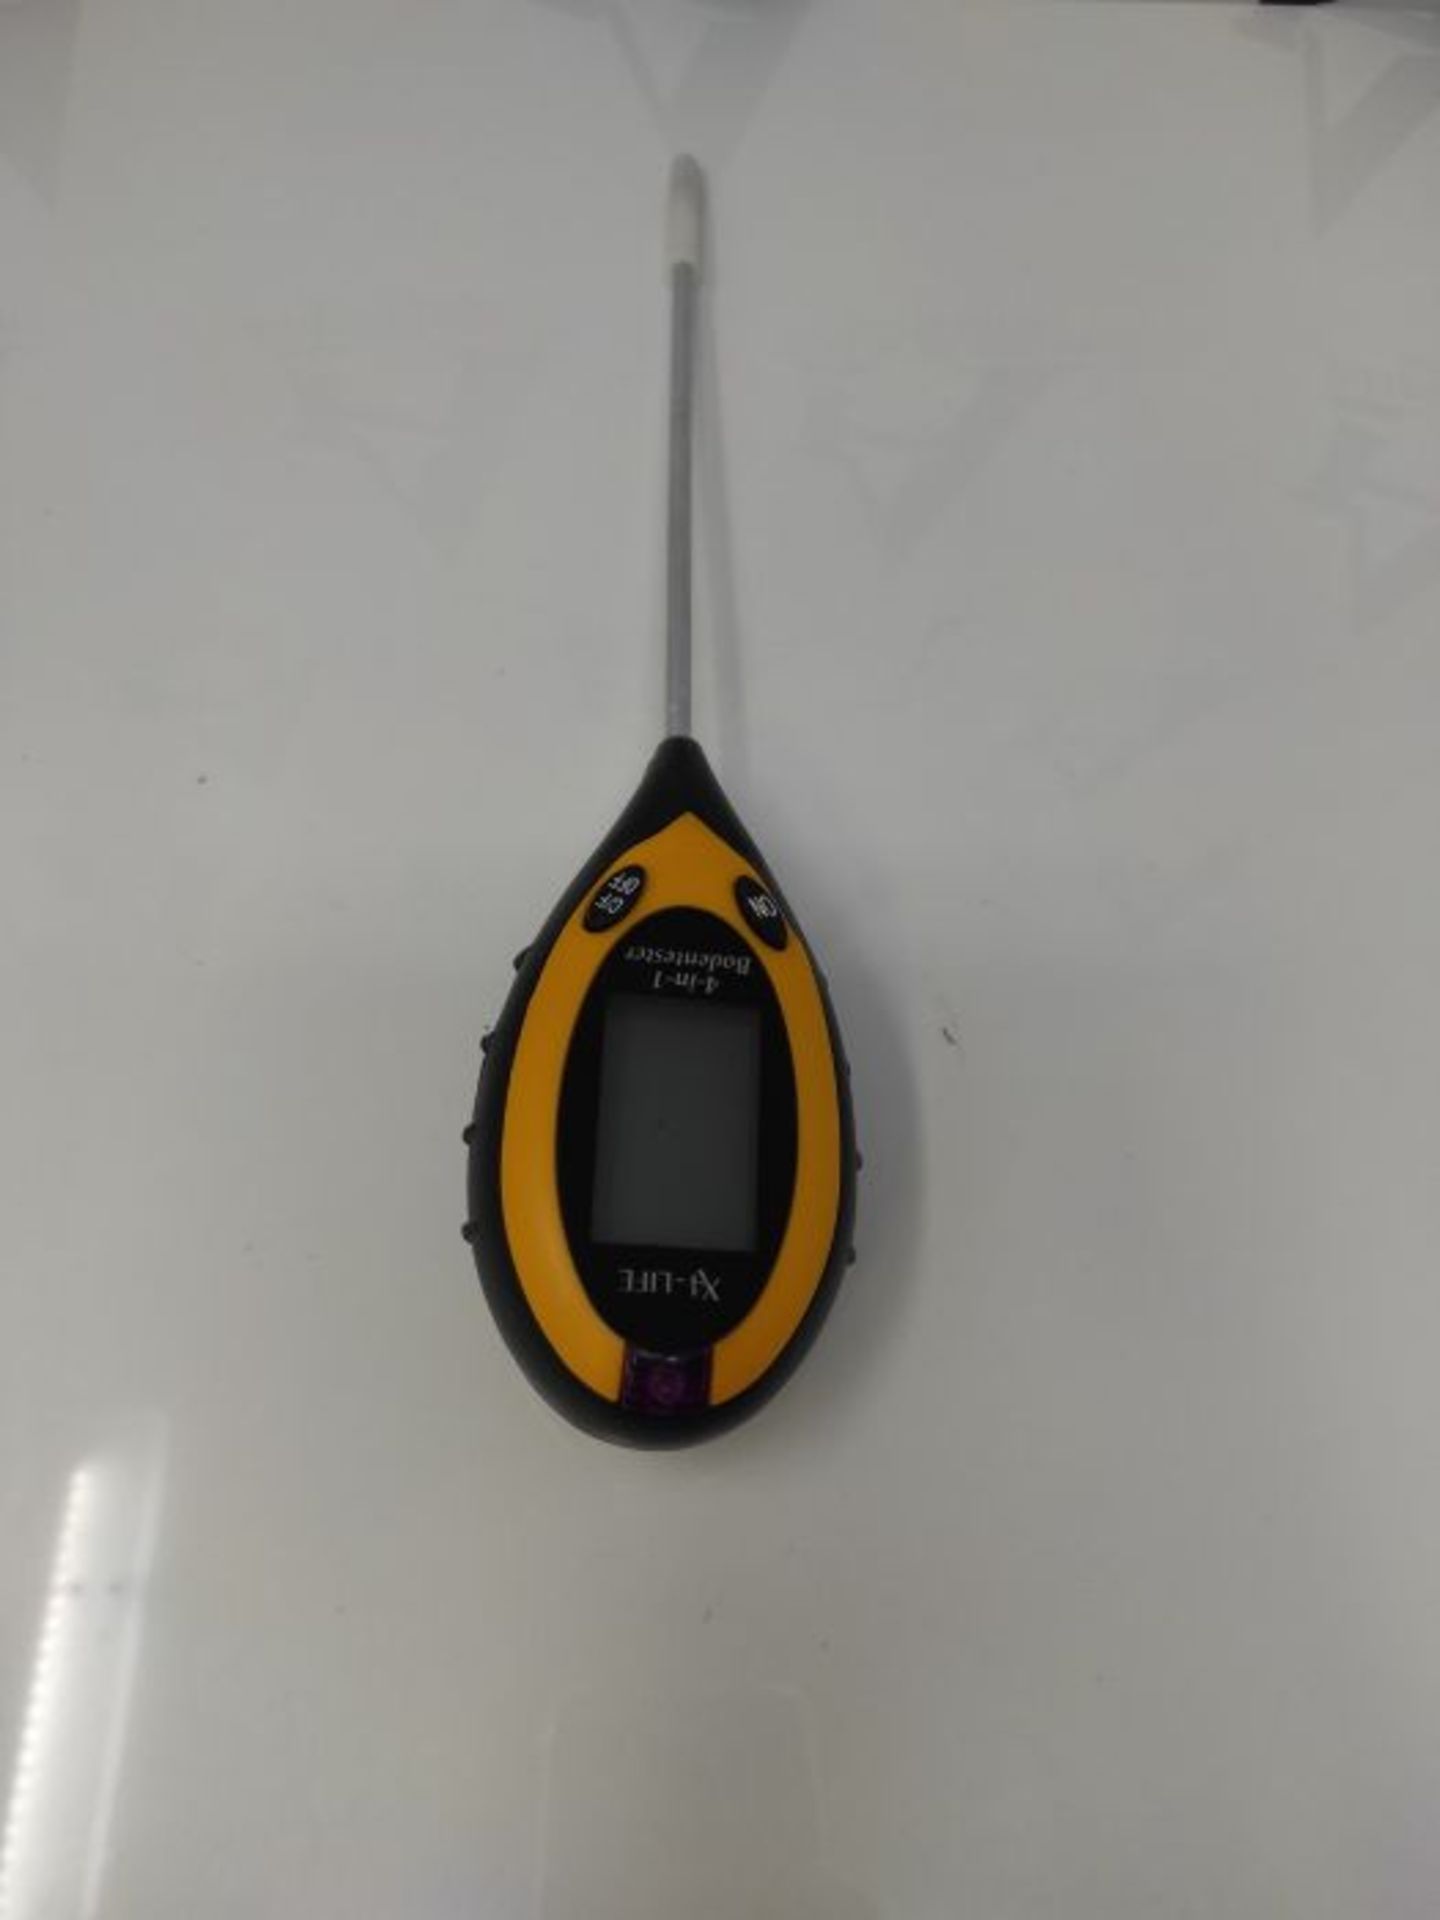 X4-LIFE 700403 4-in-1 Ground Tester Digital Ground Measuring Device - Image 2 of 2